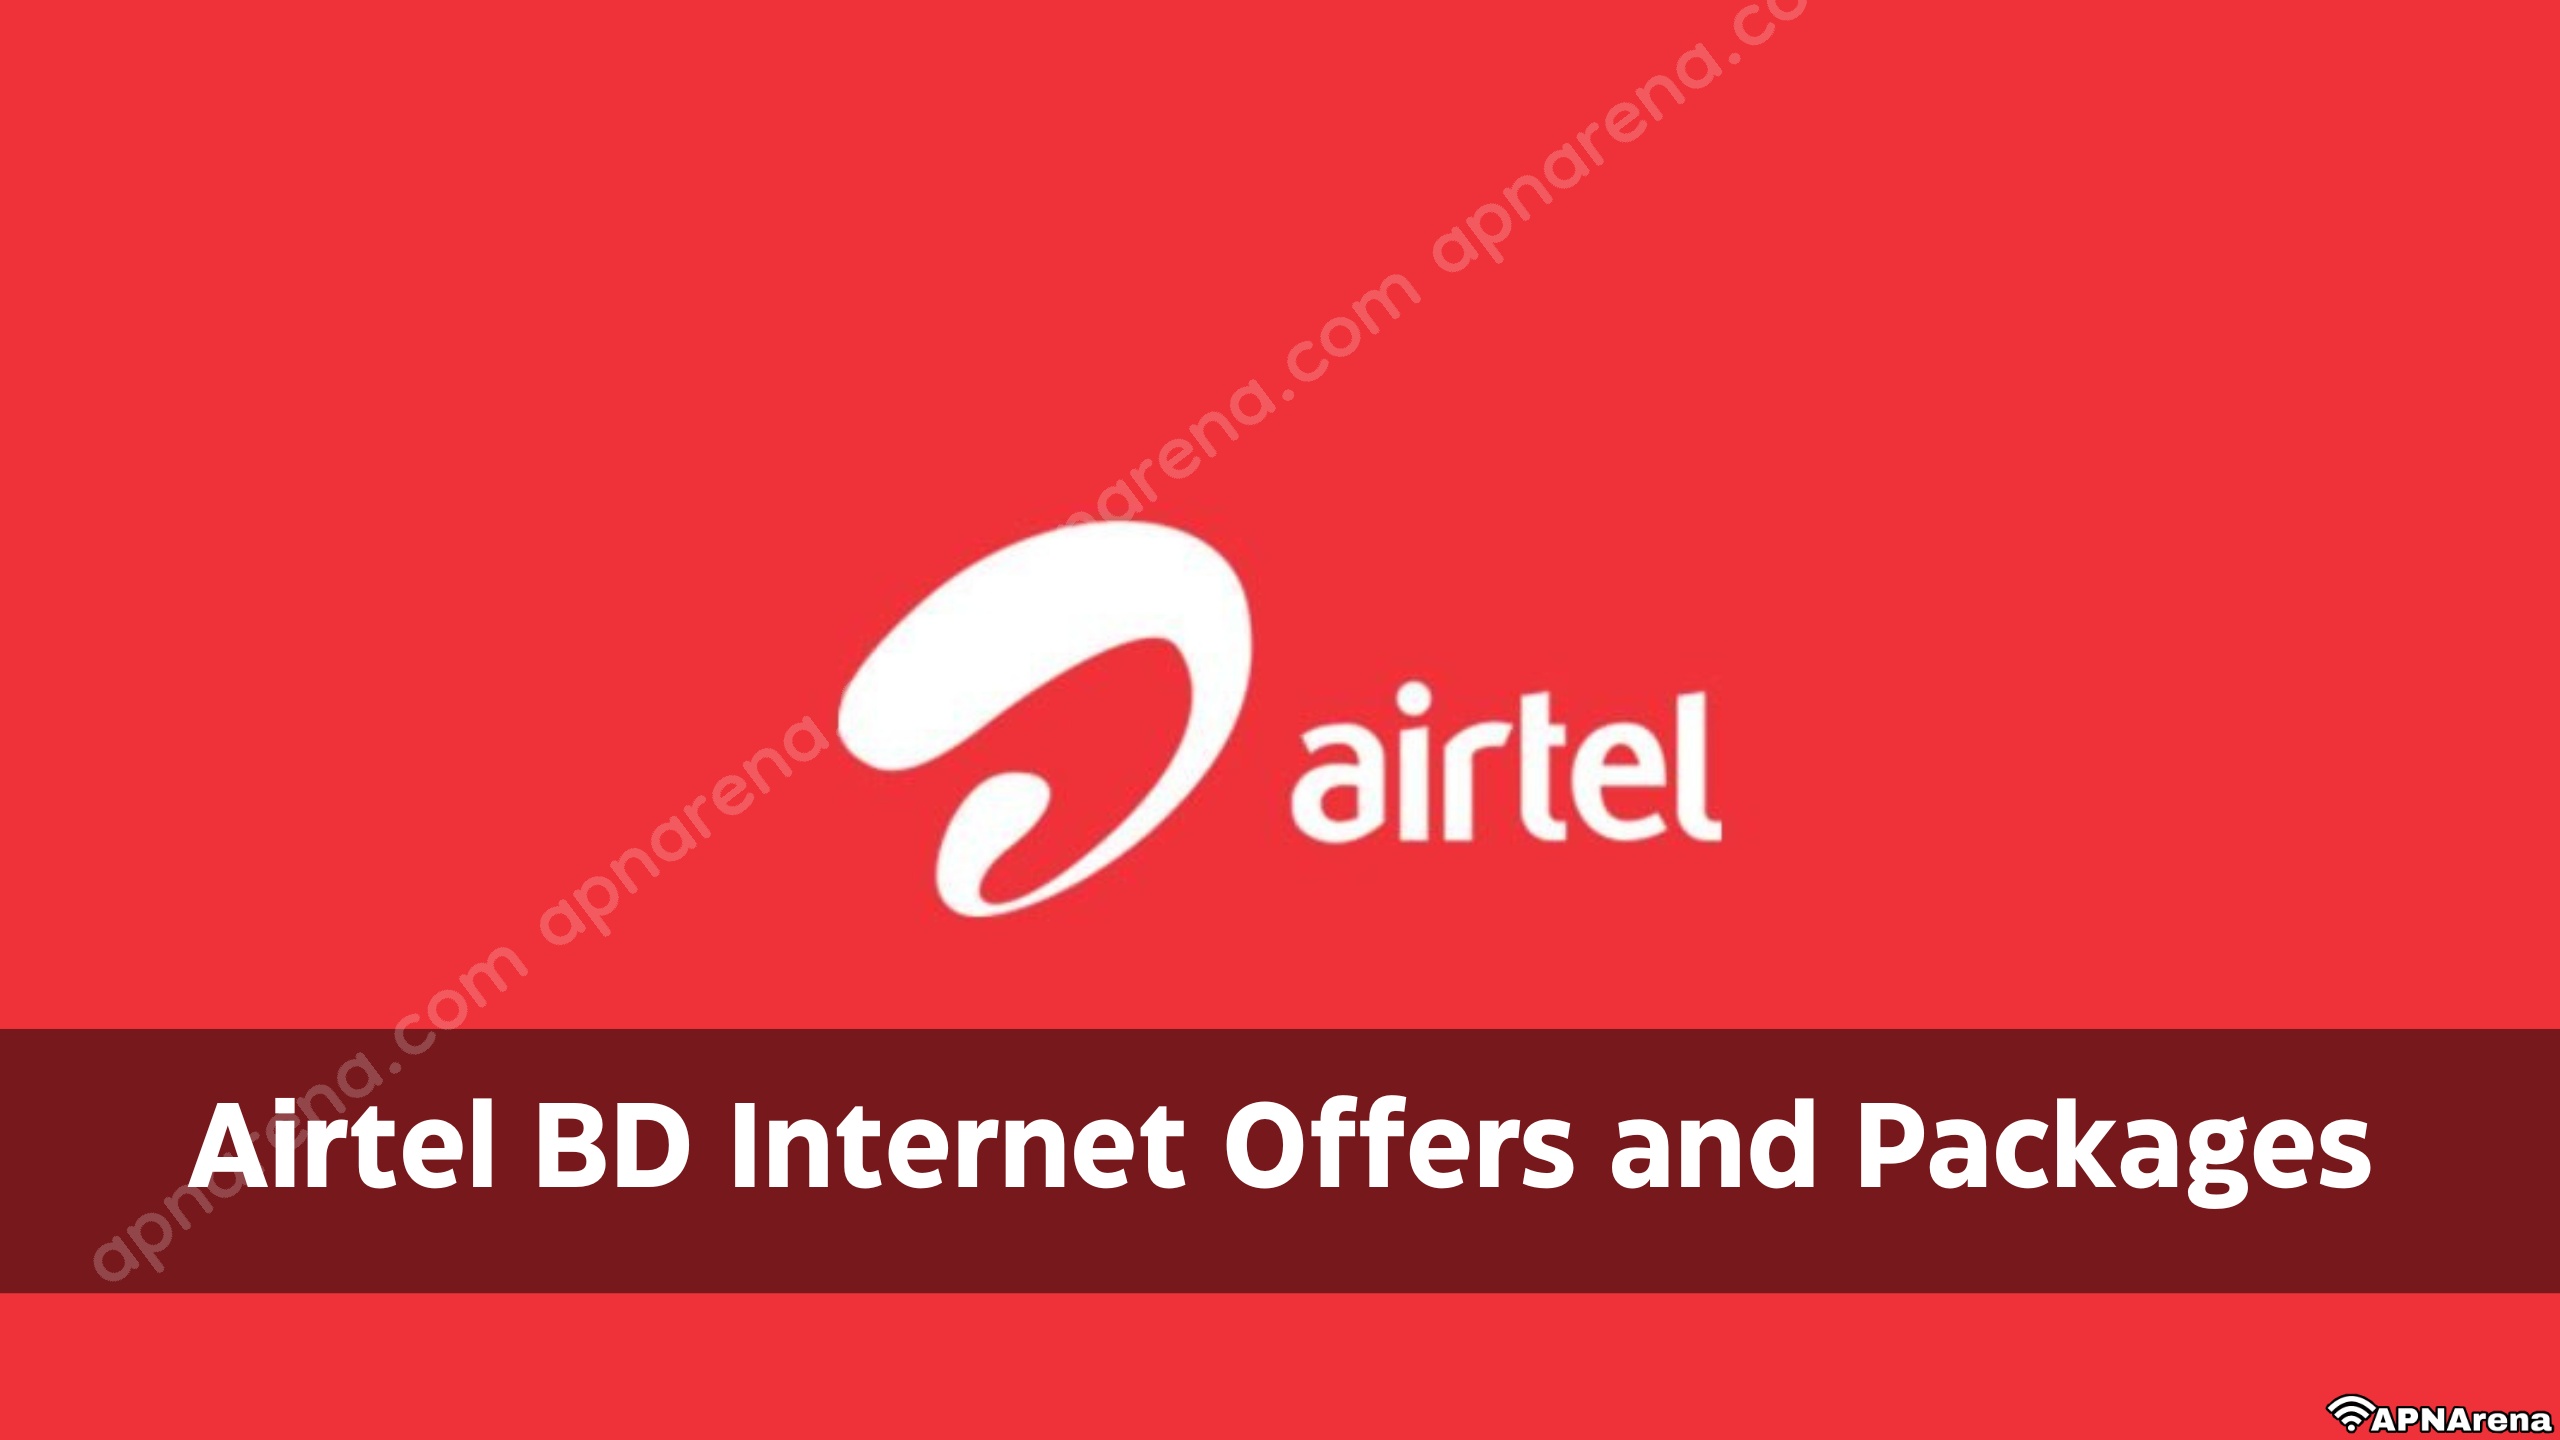 Airtel BD Internet Offer and Package